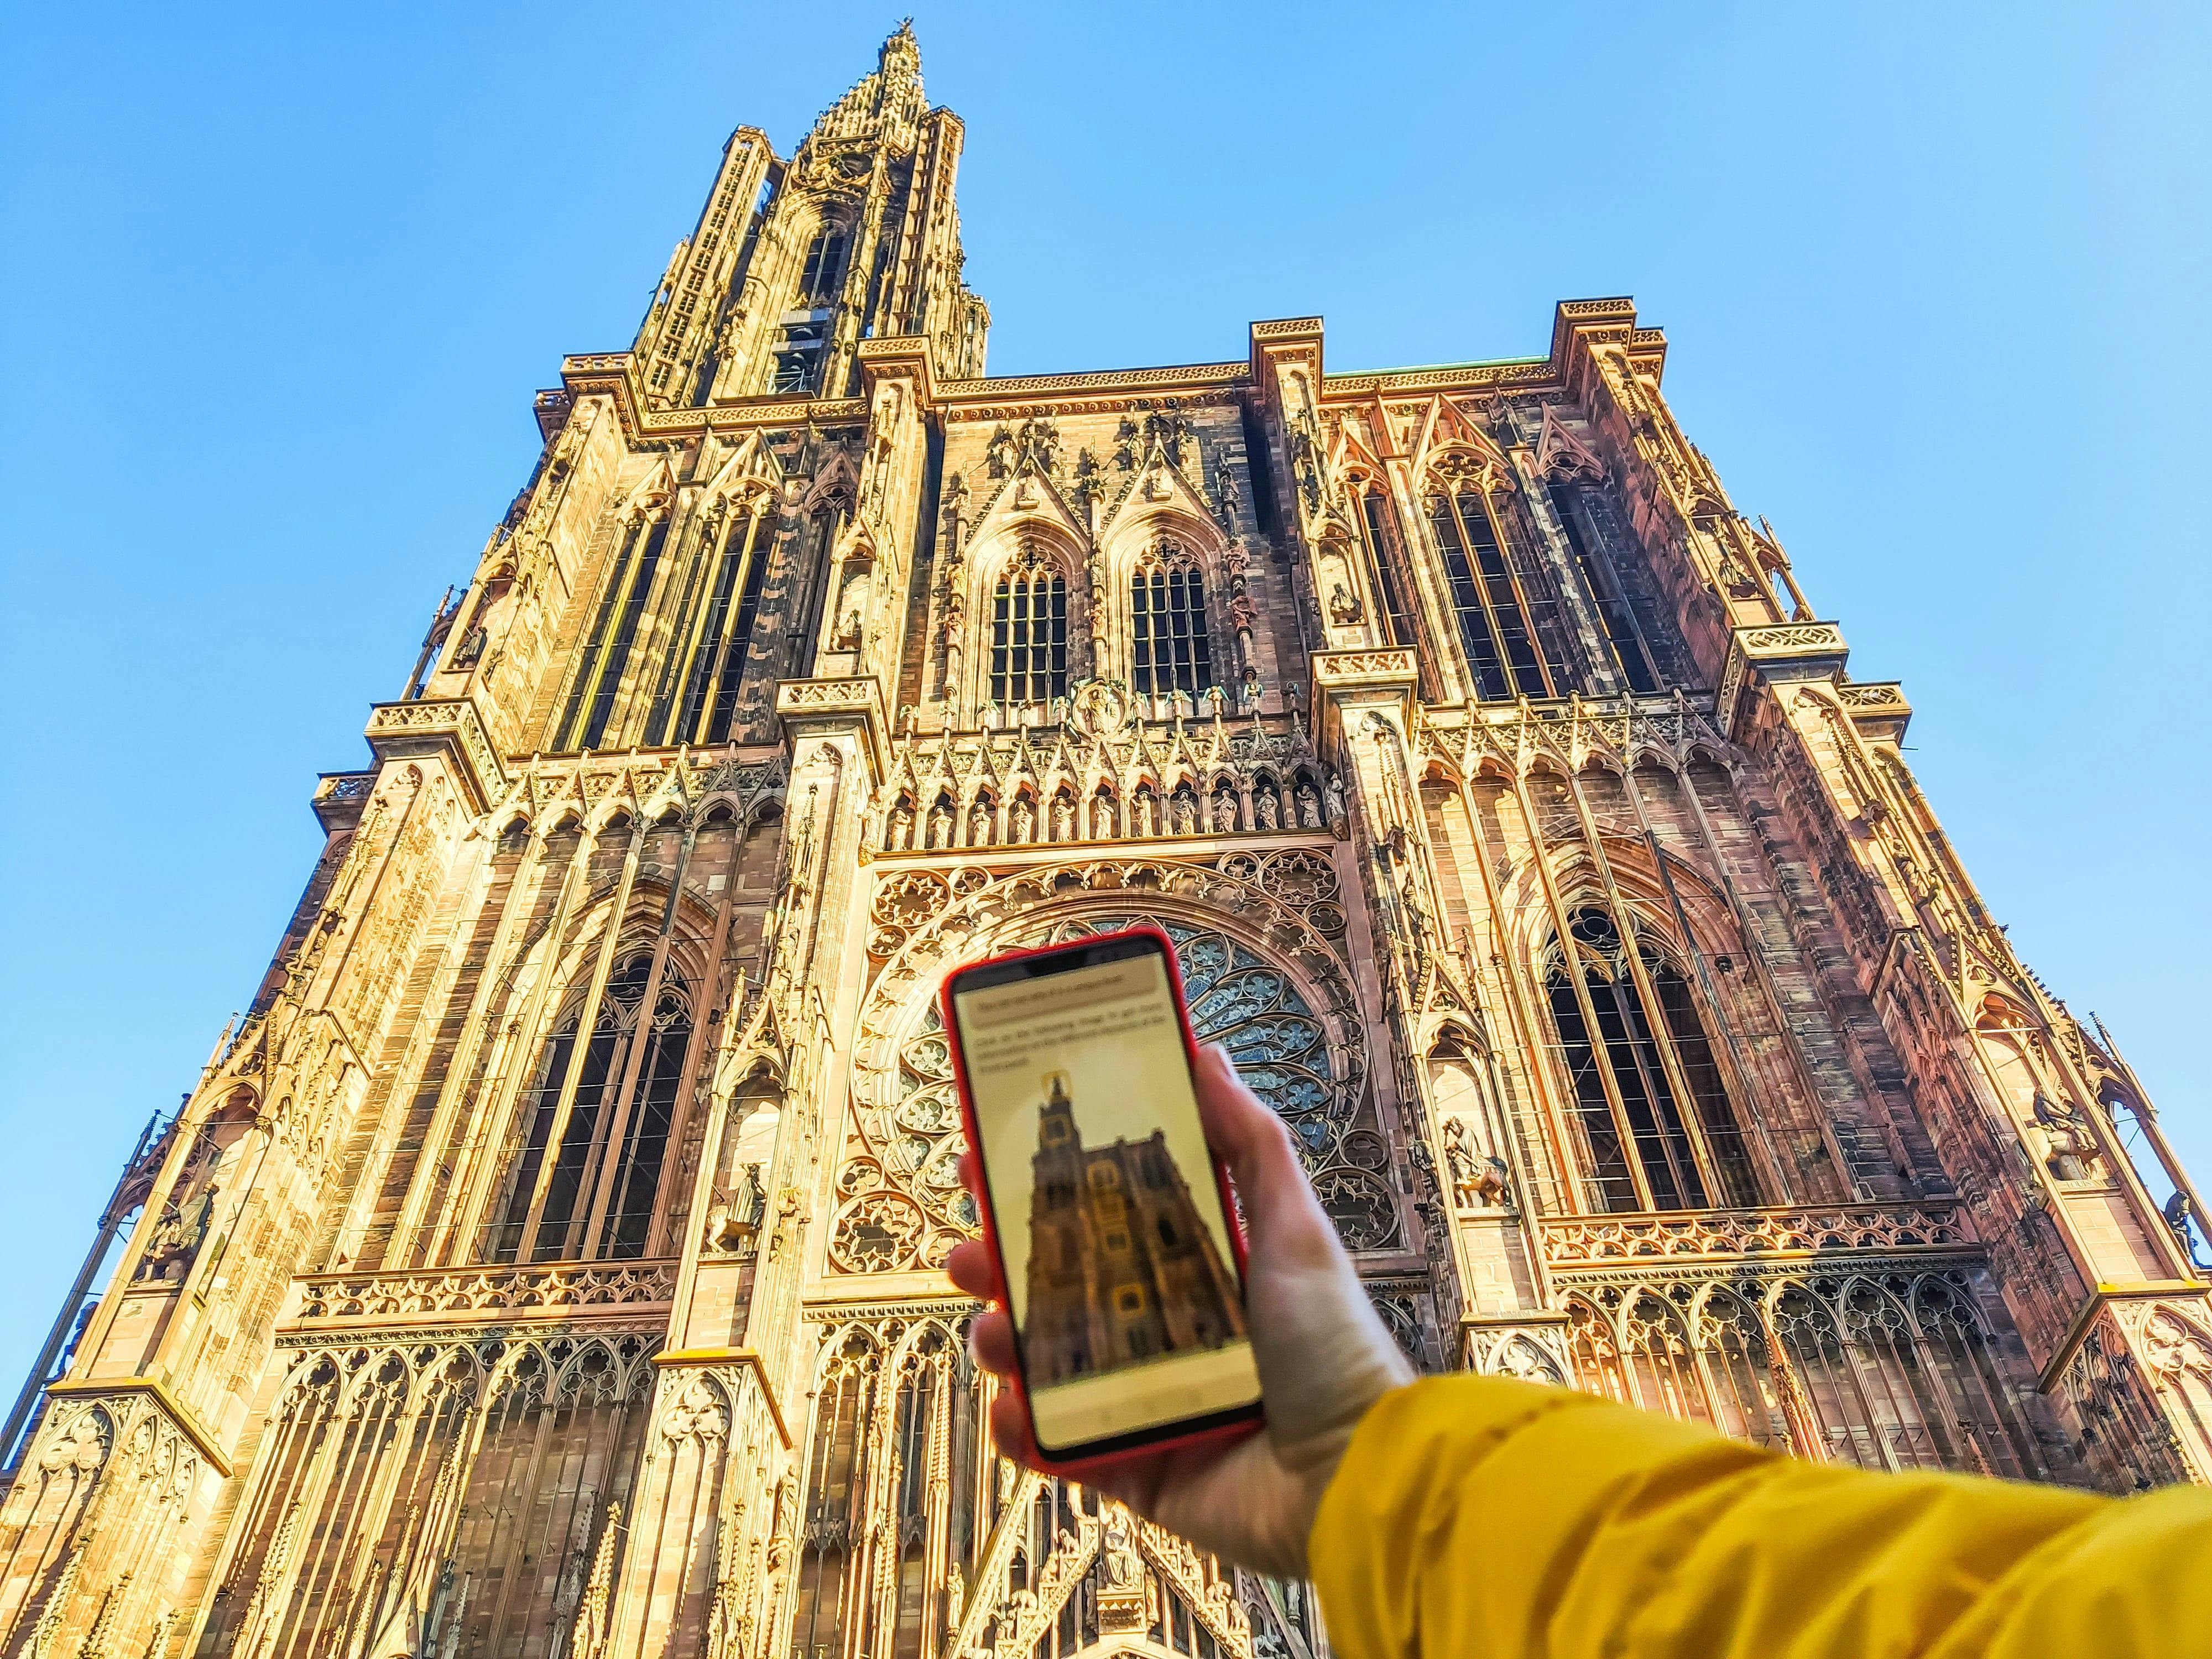 Strasbourg interactive self-guided city tour